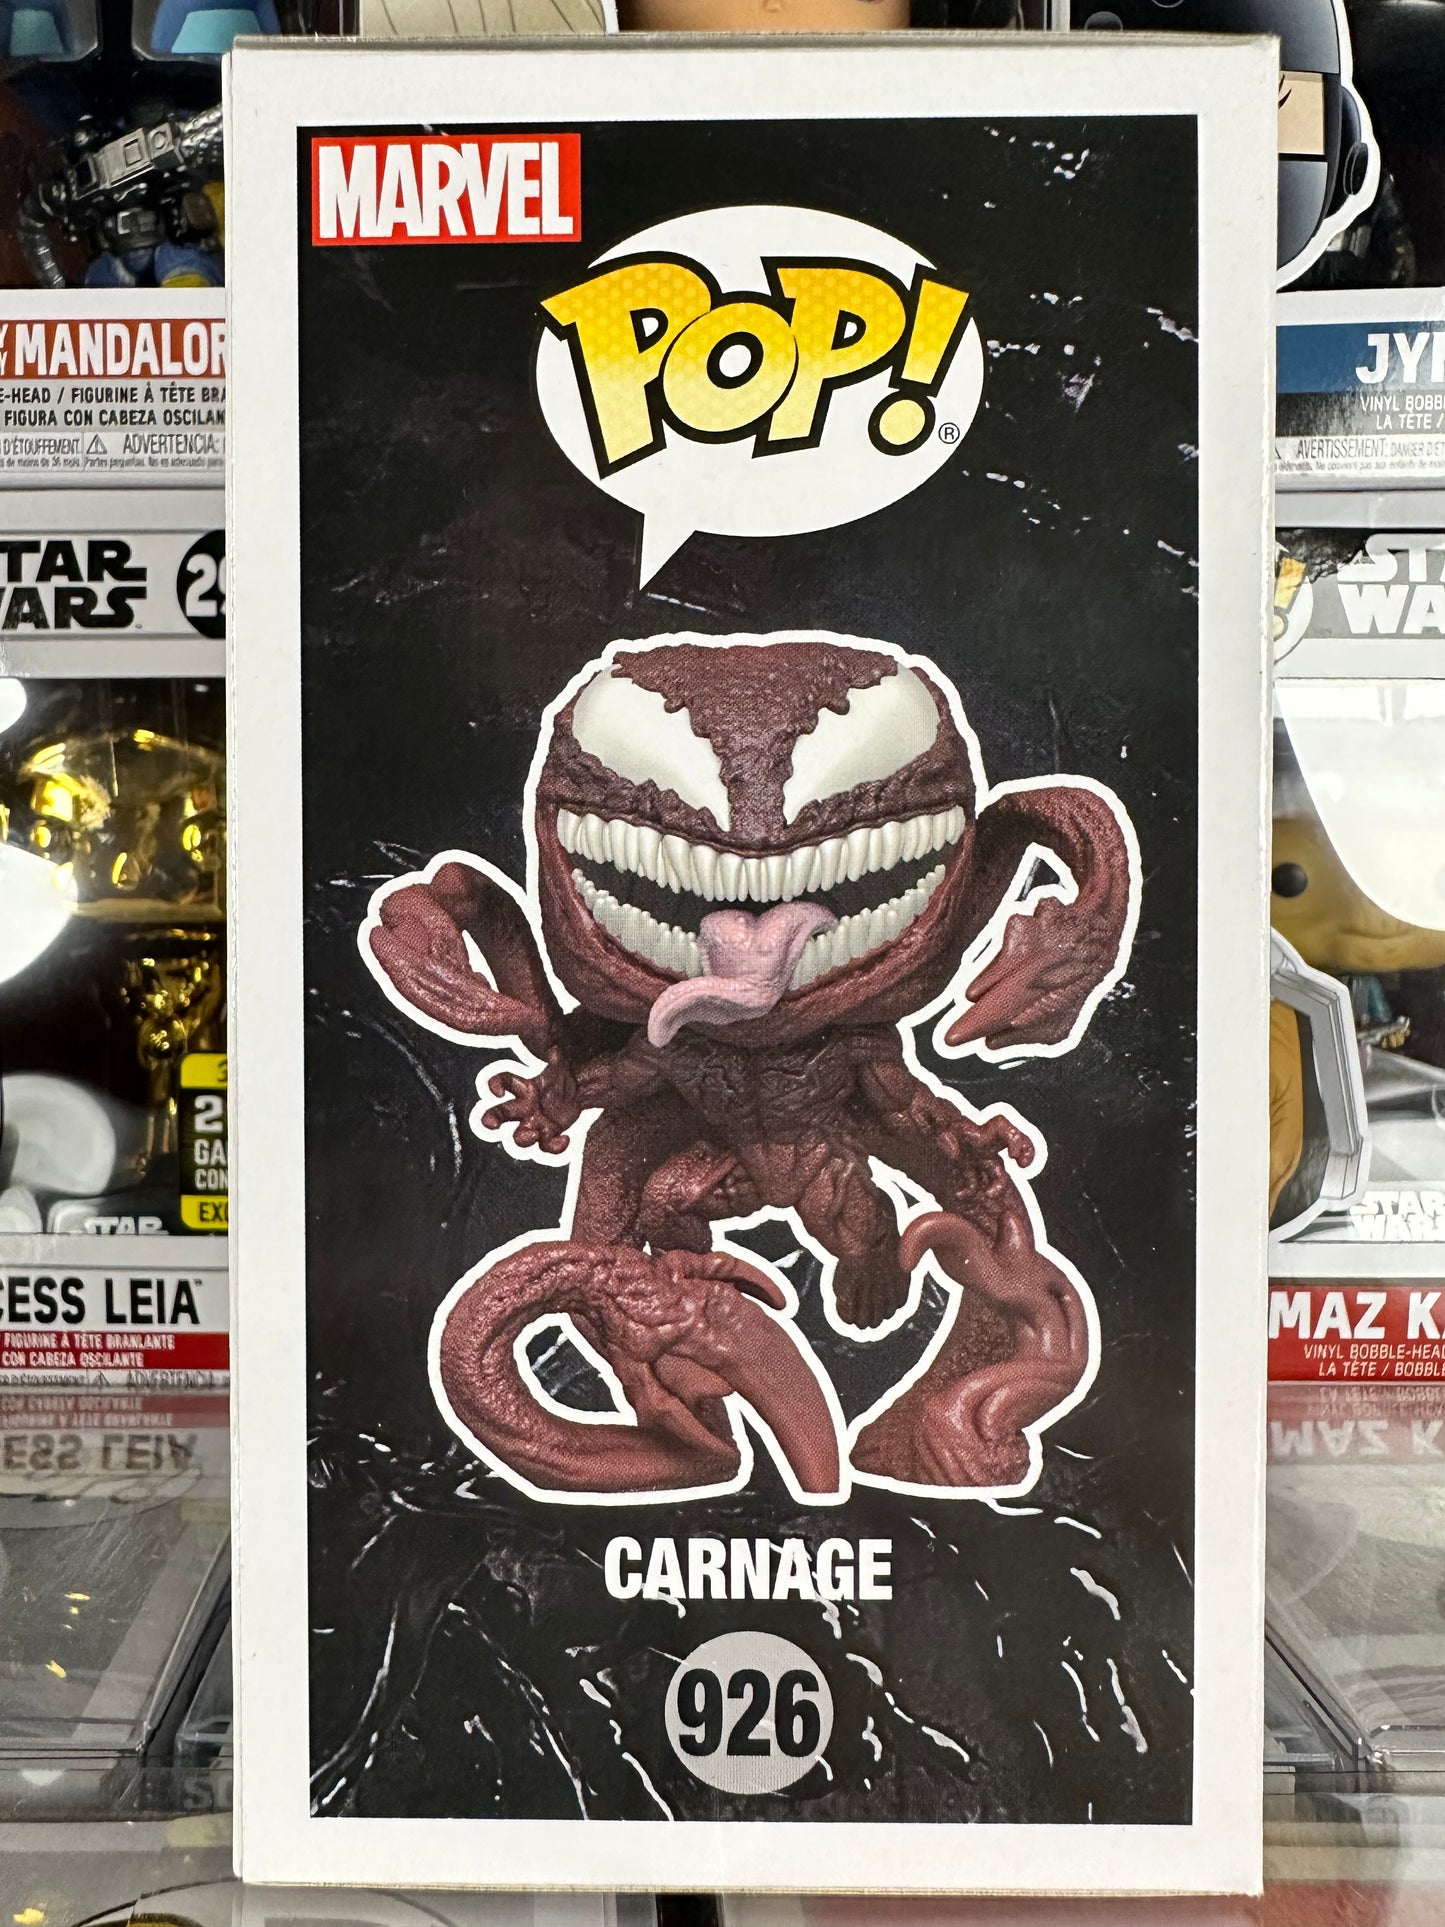 Marvel Venom Let There Be Carnage - Carnage (2021 Fall Convention) (926)